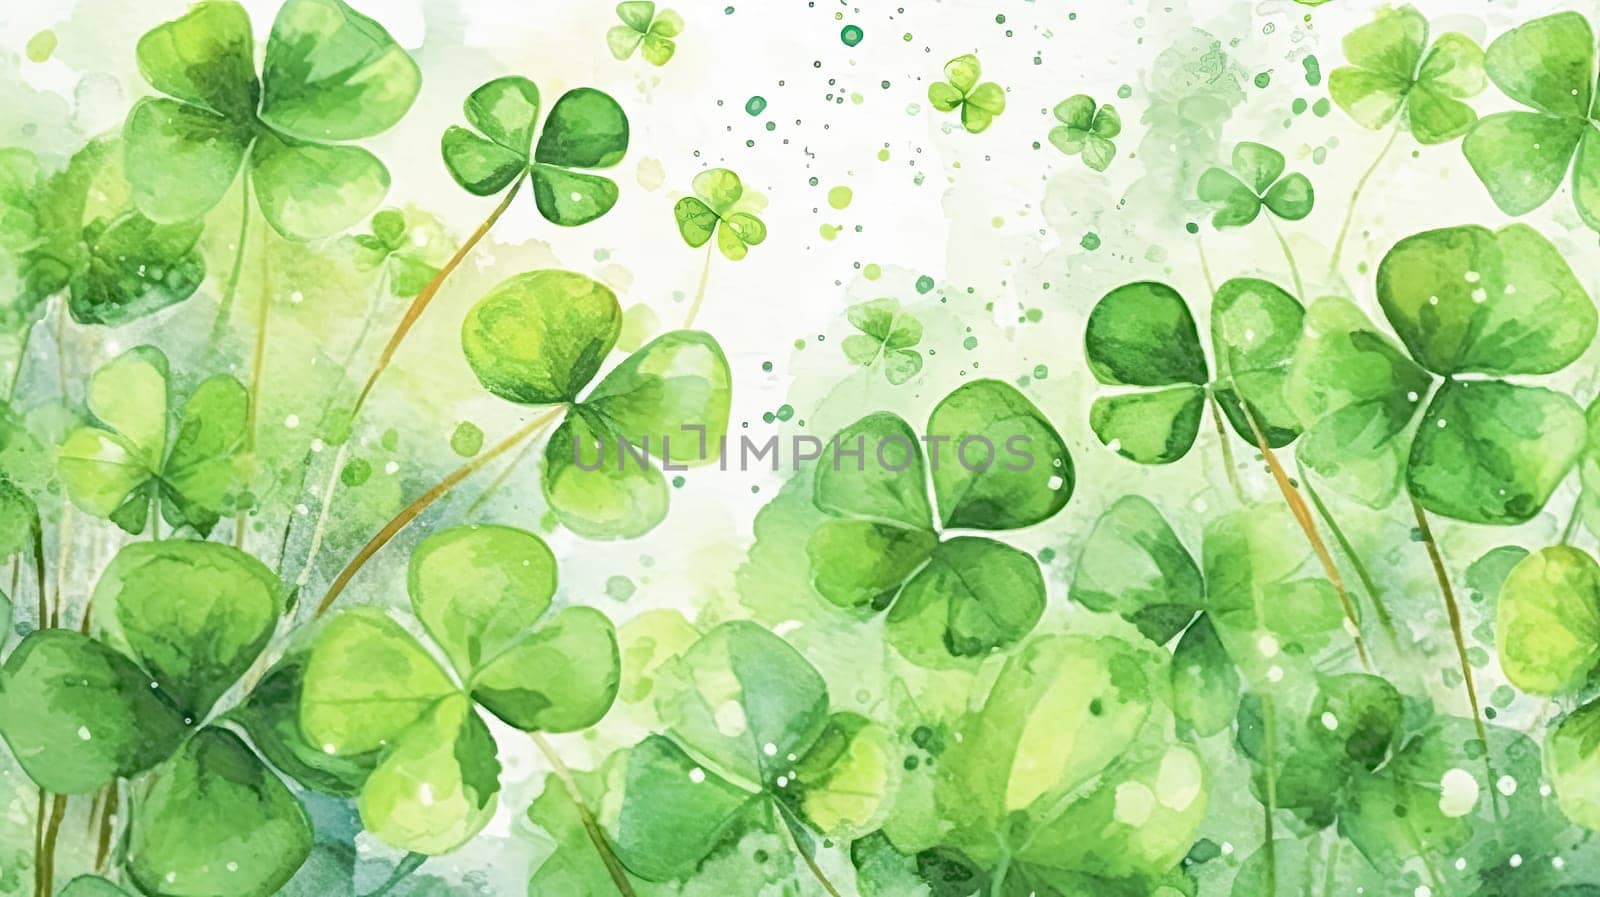 a watercolor image showcases the delicate beauty of the clover by Alla_Morozova93